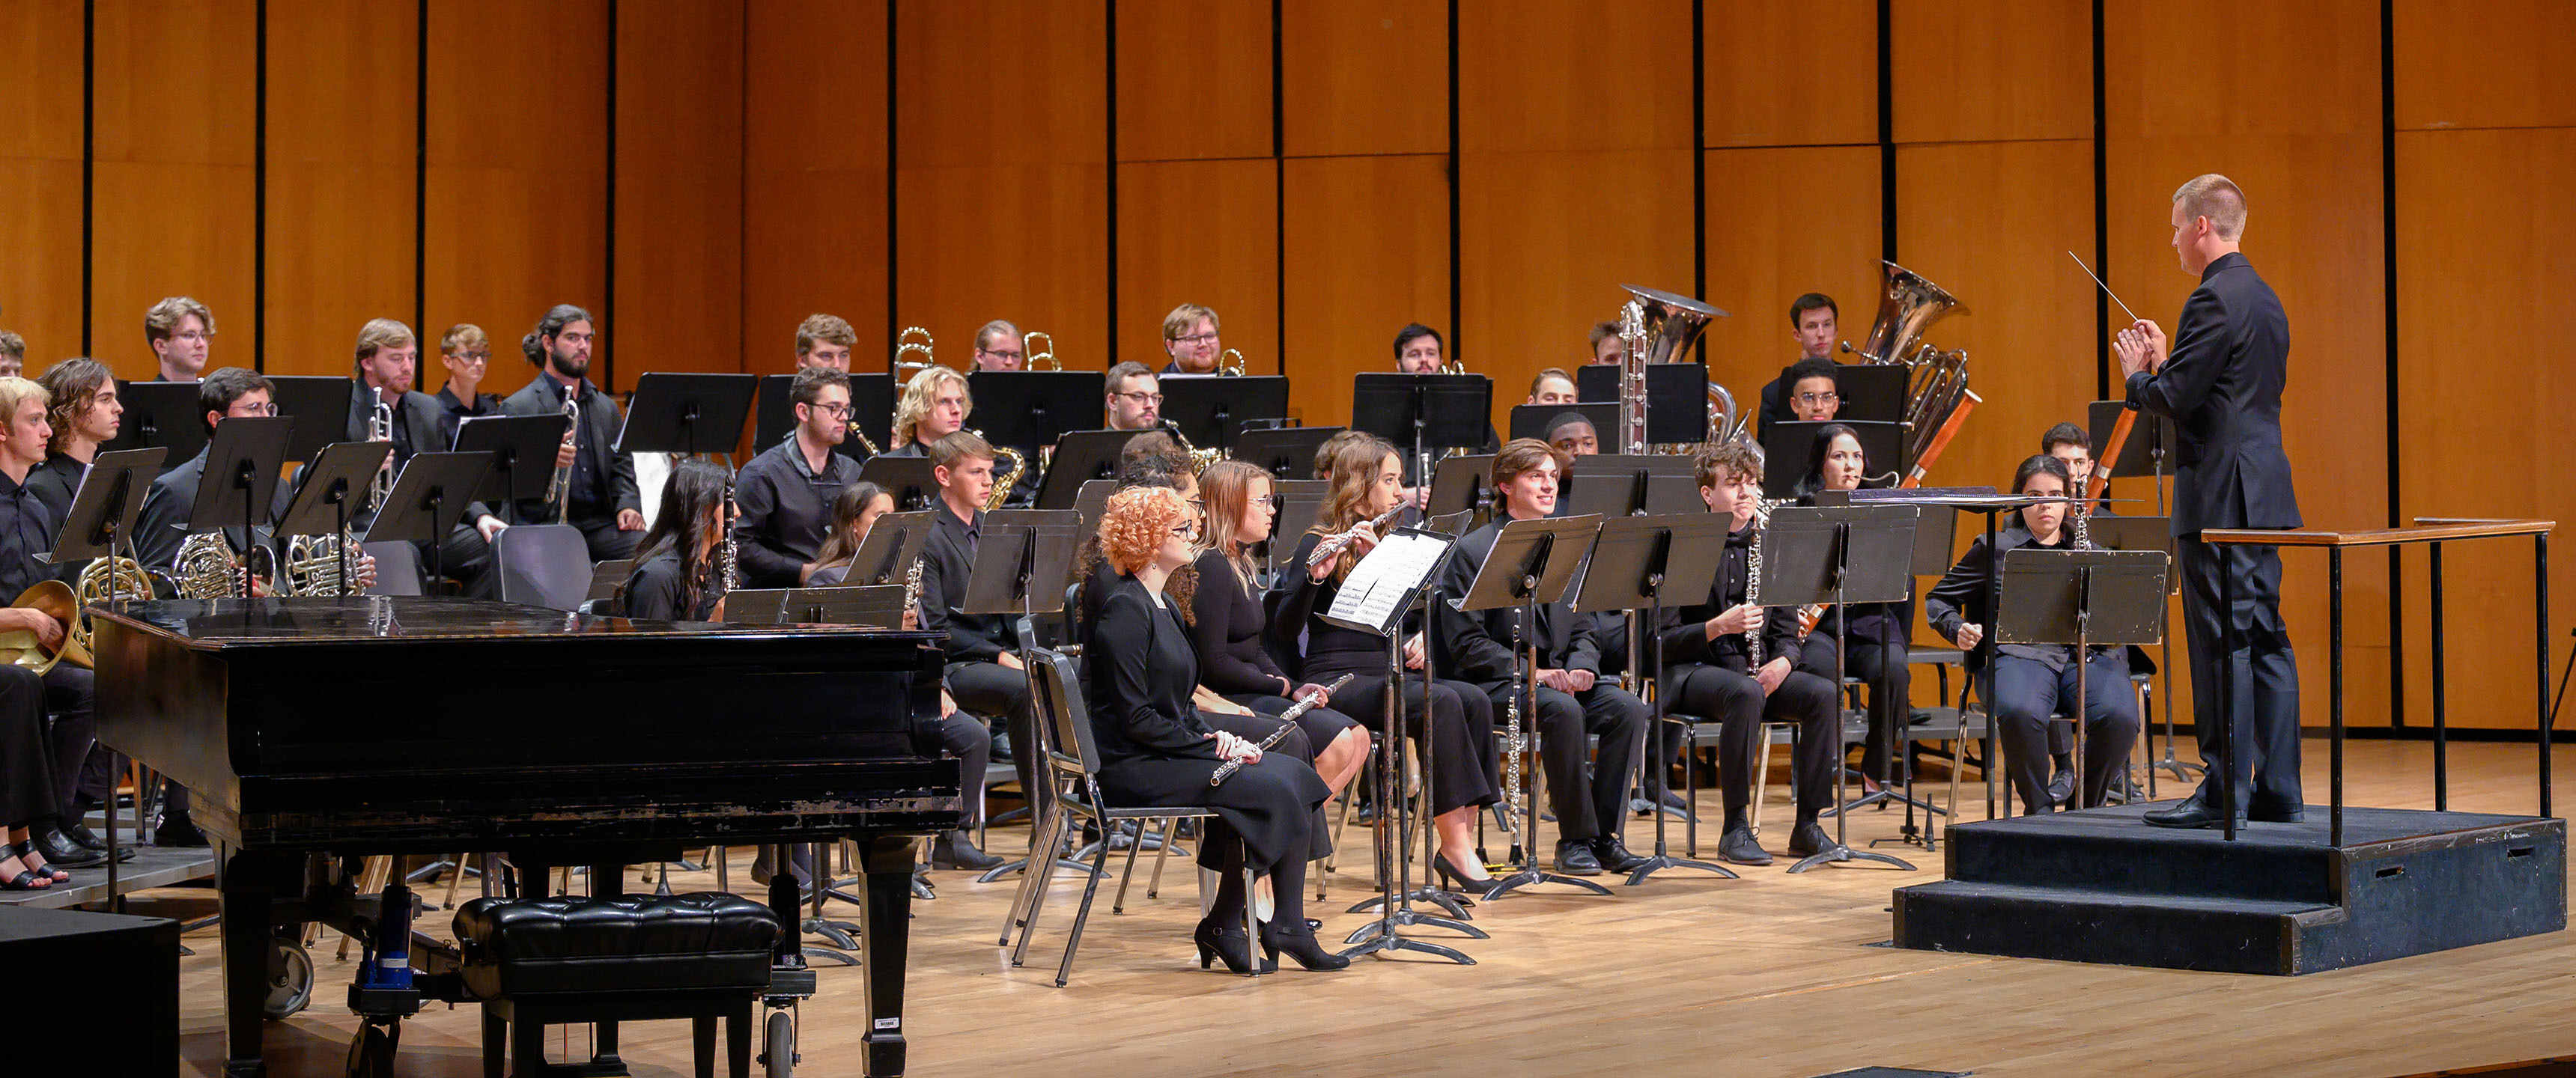 LSU SYMPHONIC WINDS TO PERFORM AT REGIONAL CONFERENCE